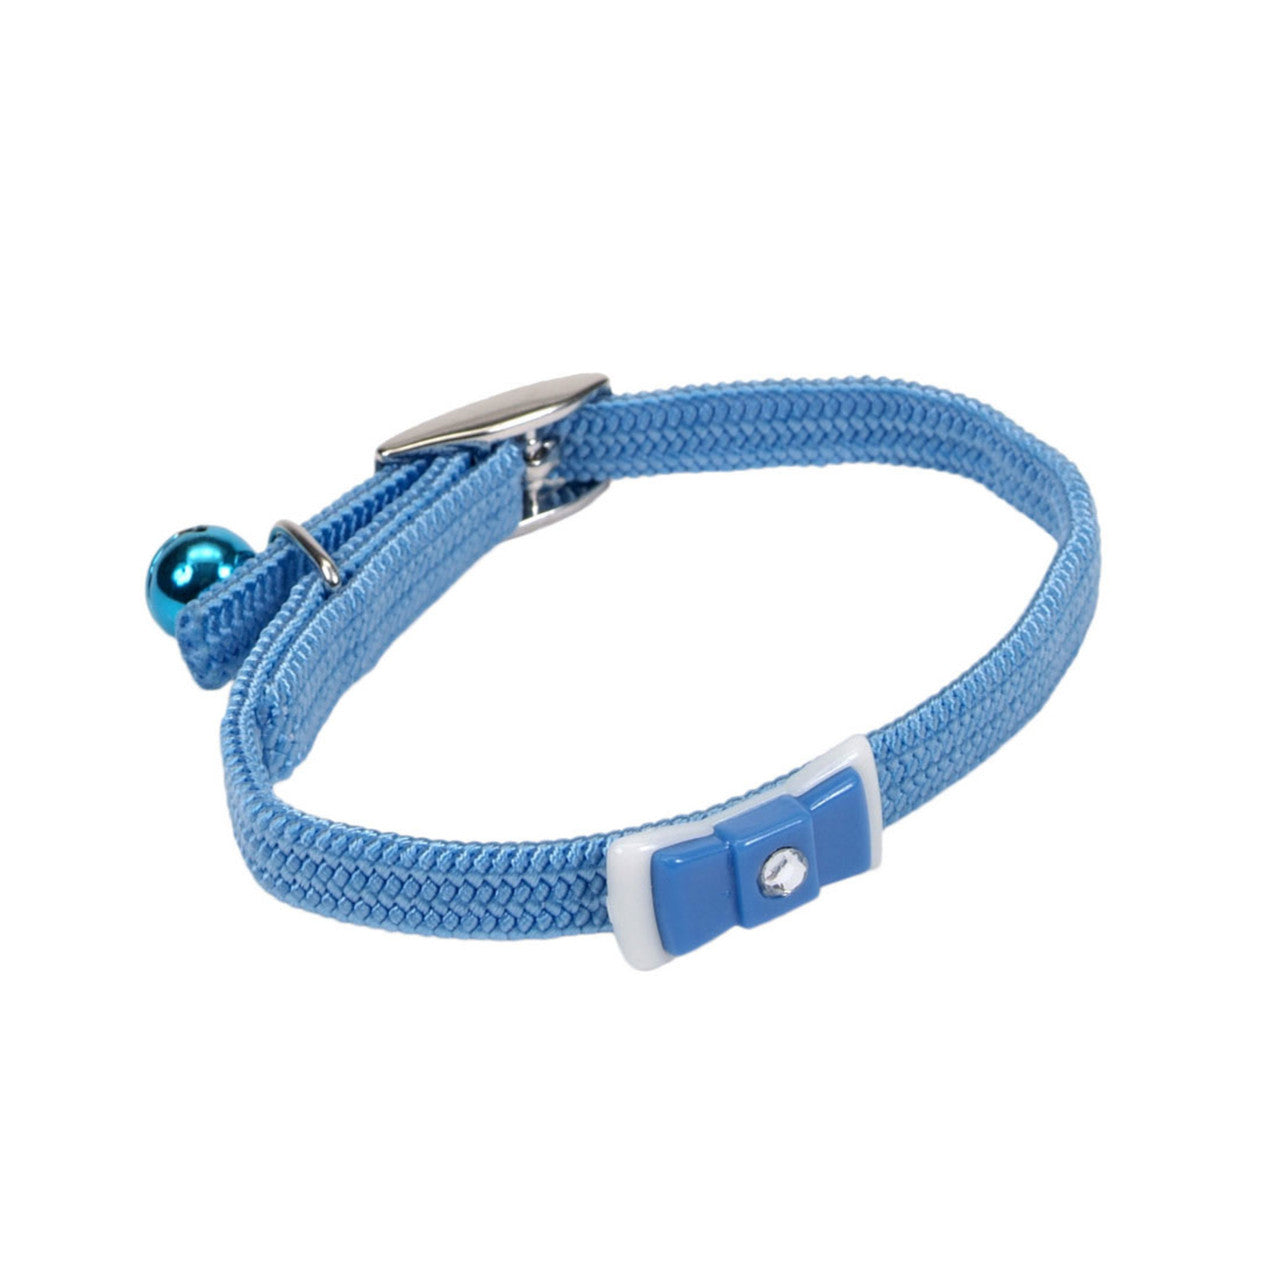 Lil Pals Elasticized Safety Kitten Collar with Jeweled Bow Light Blue 3/8 in x 8 in